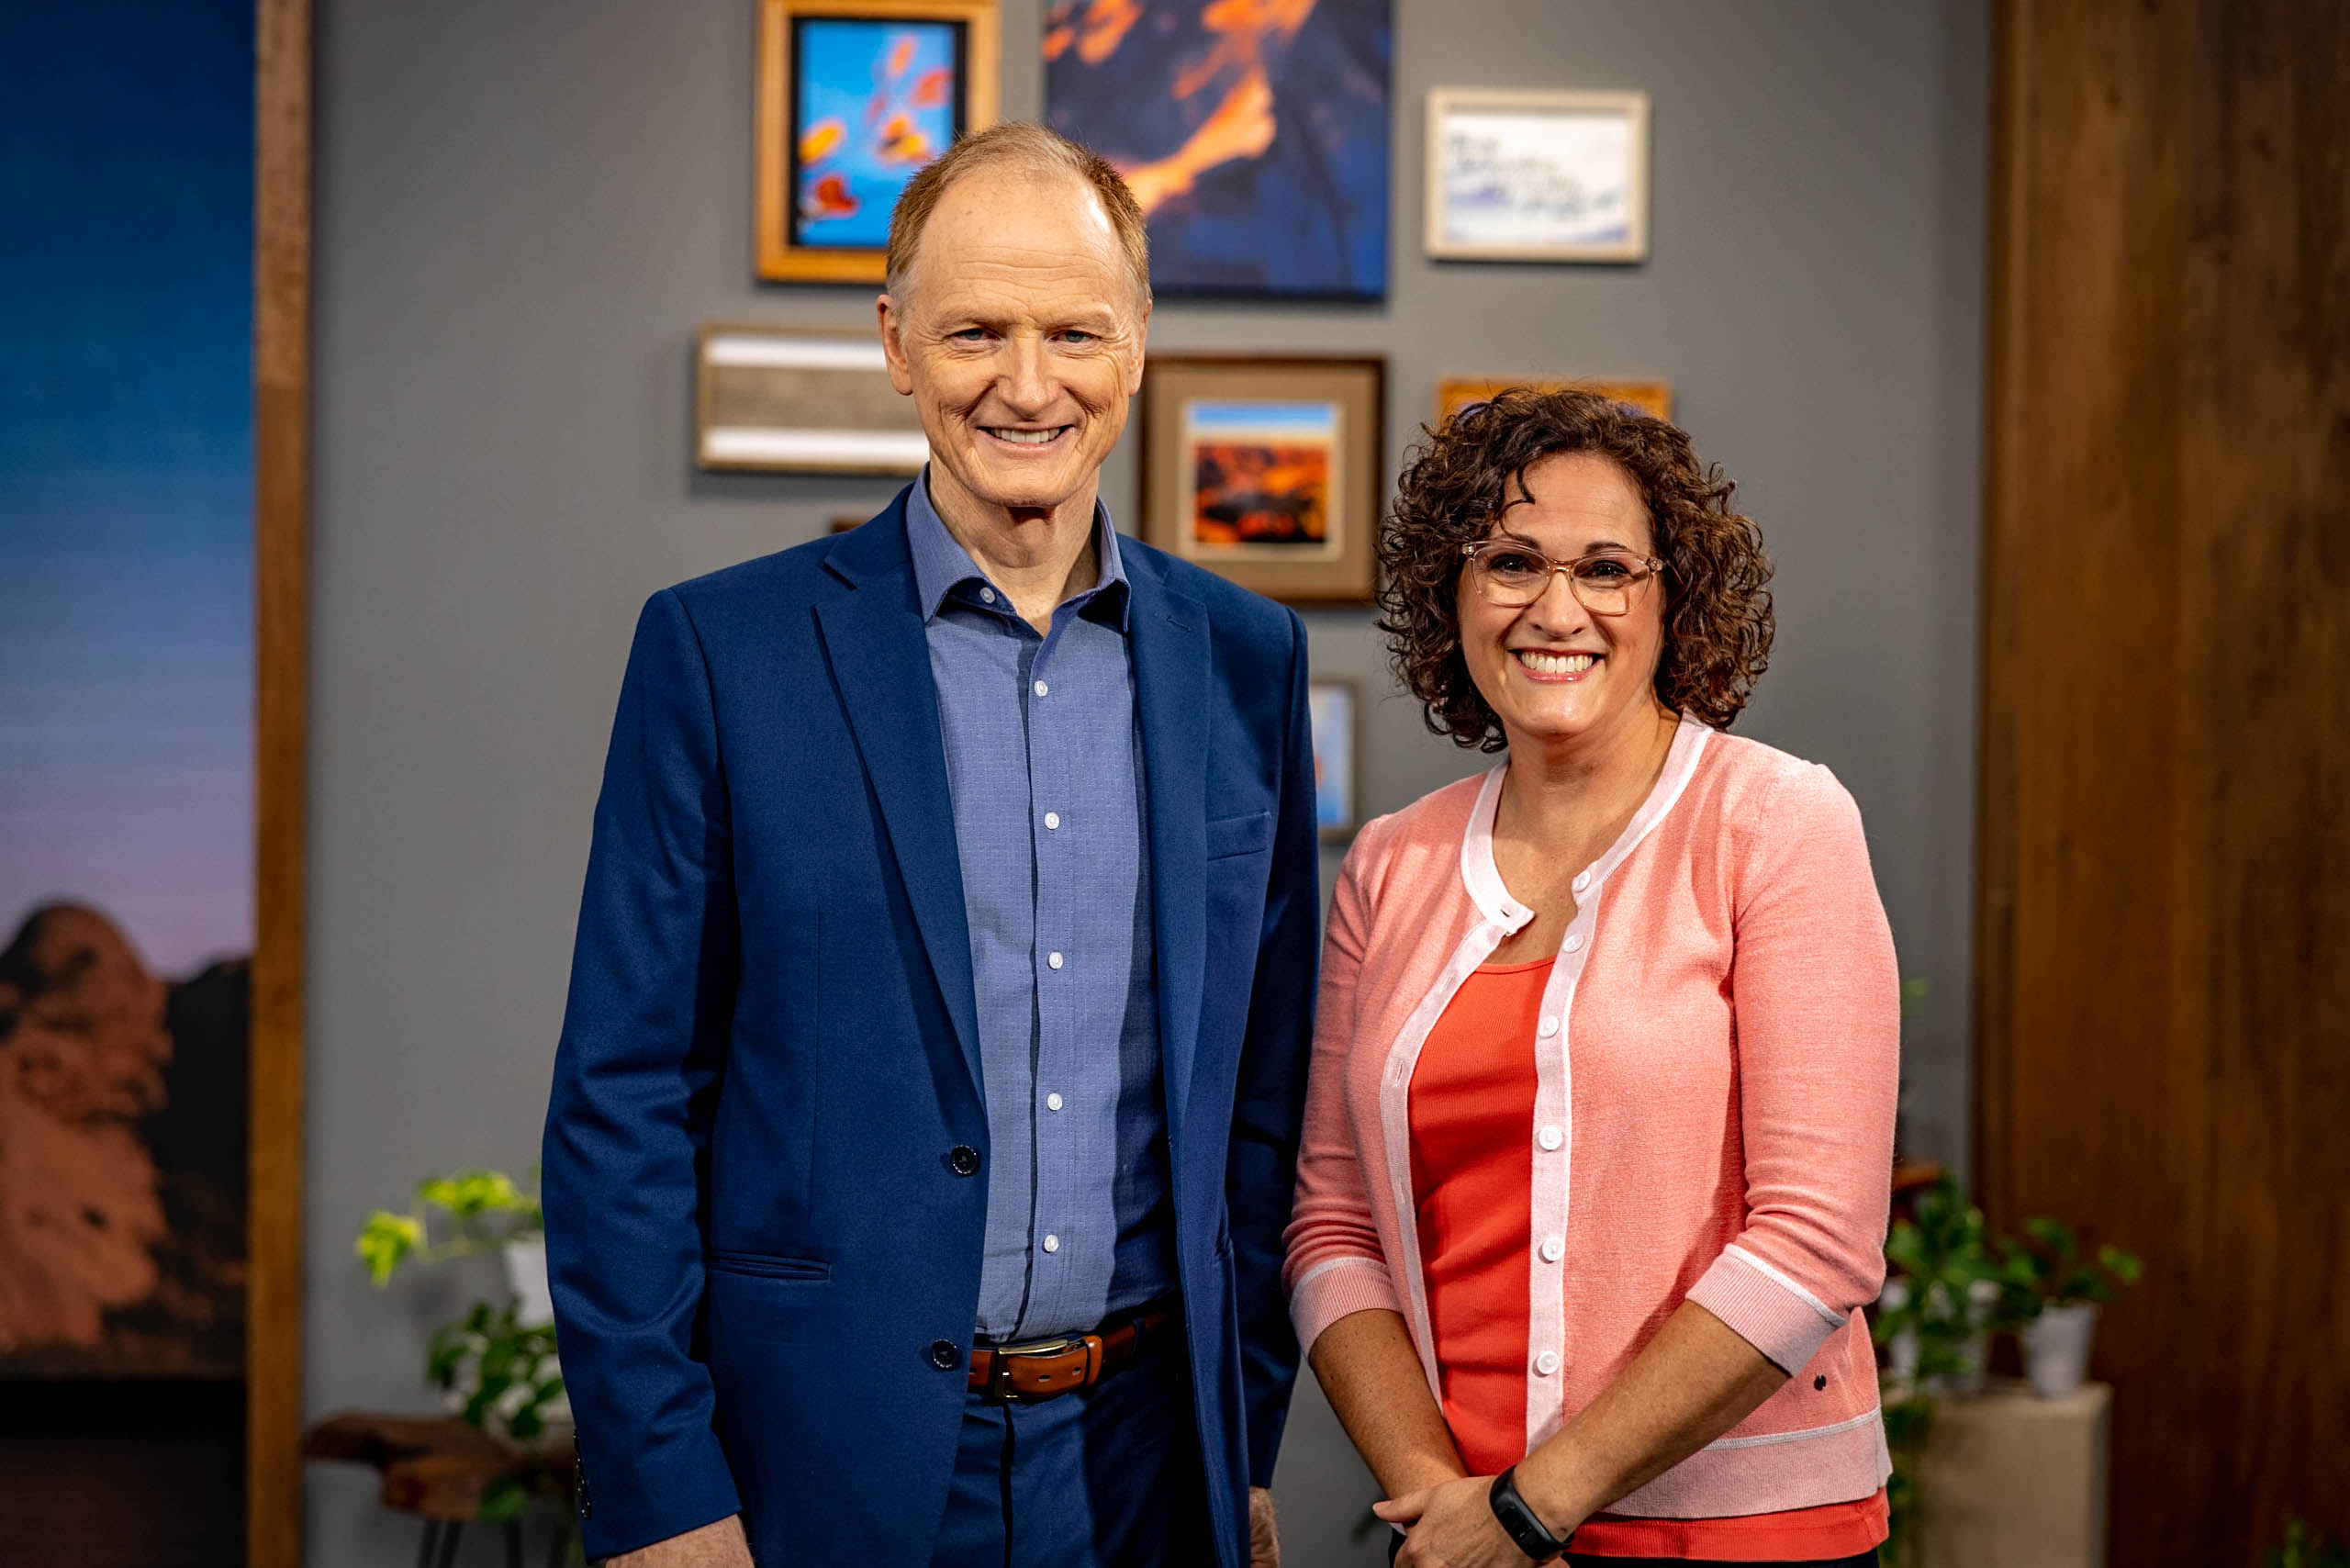 John Bradshaw and Angela Emde pose on the set of Connect. Emde joined Connect to share a powerful prayer story.